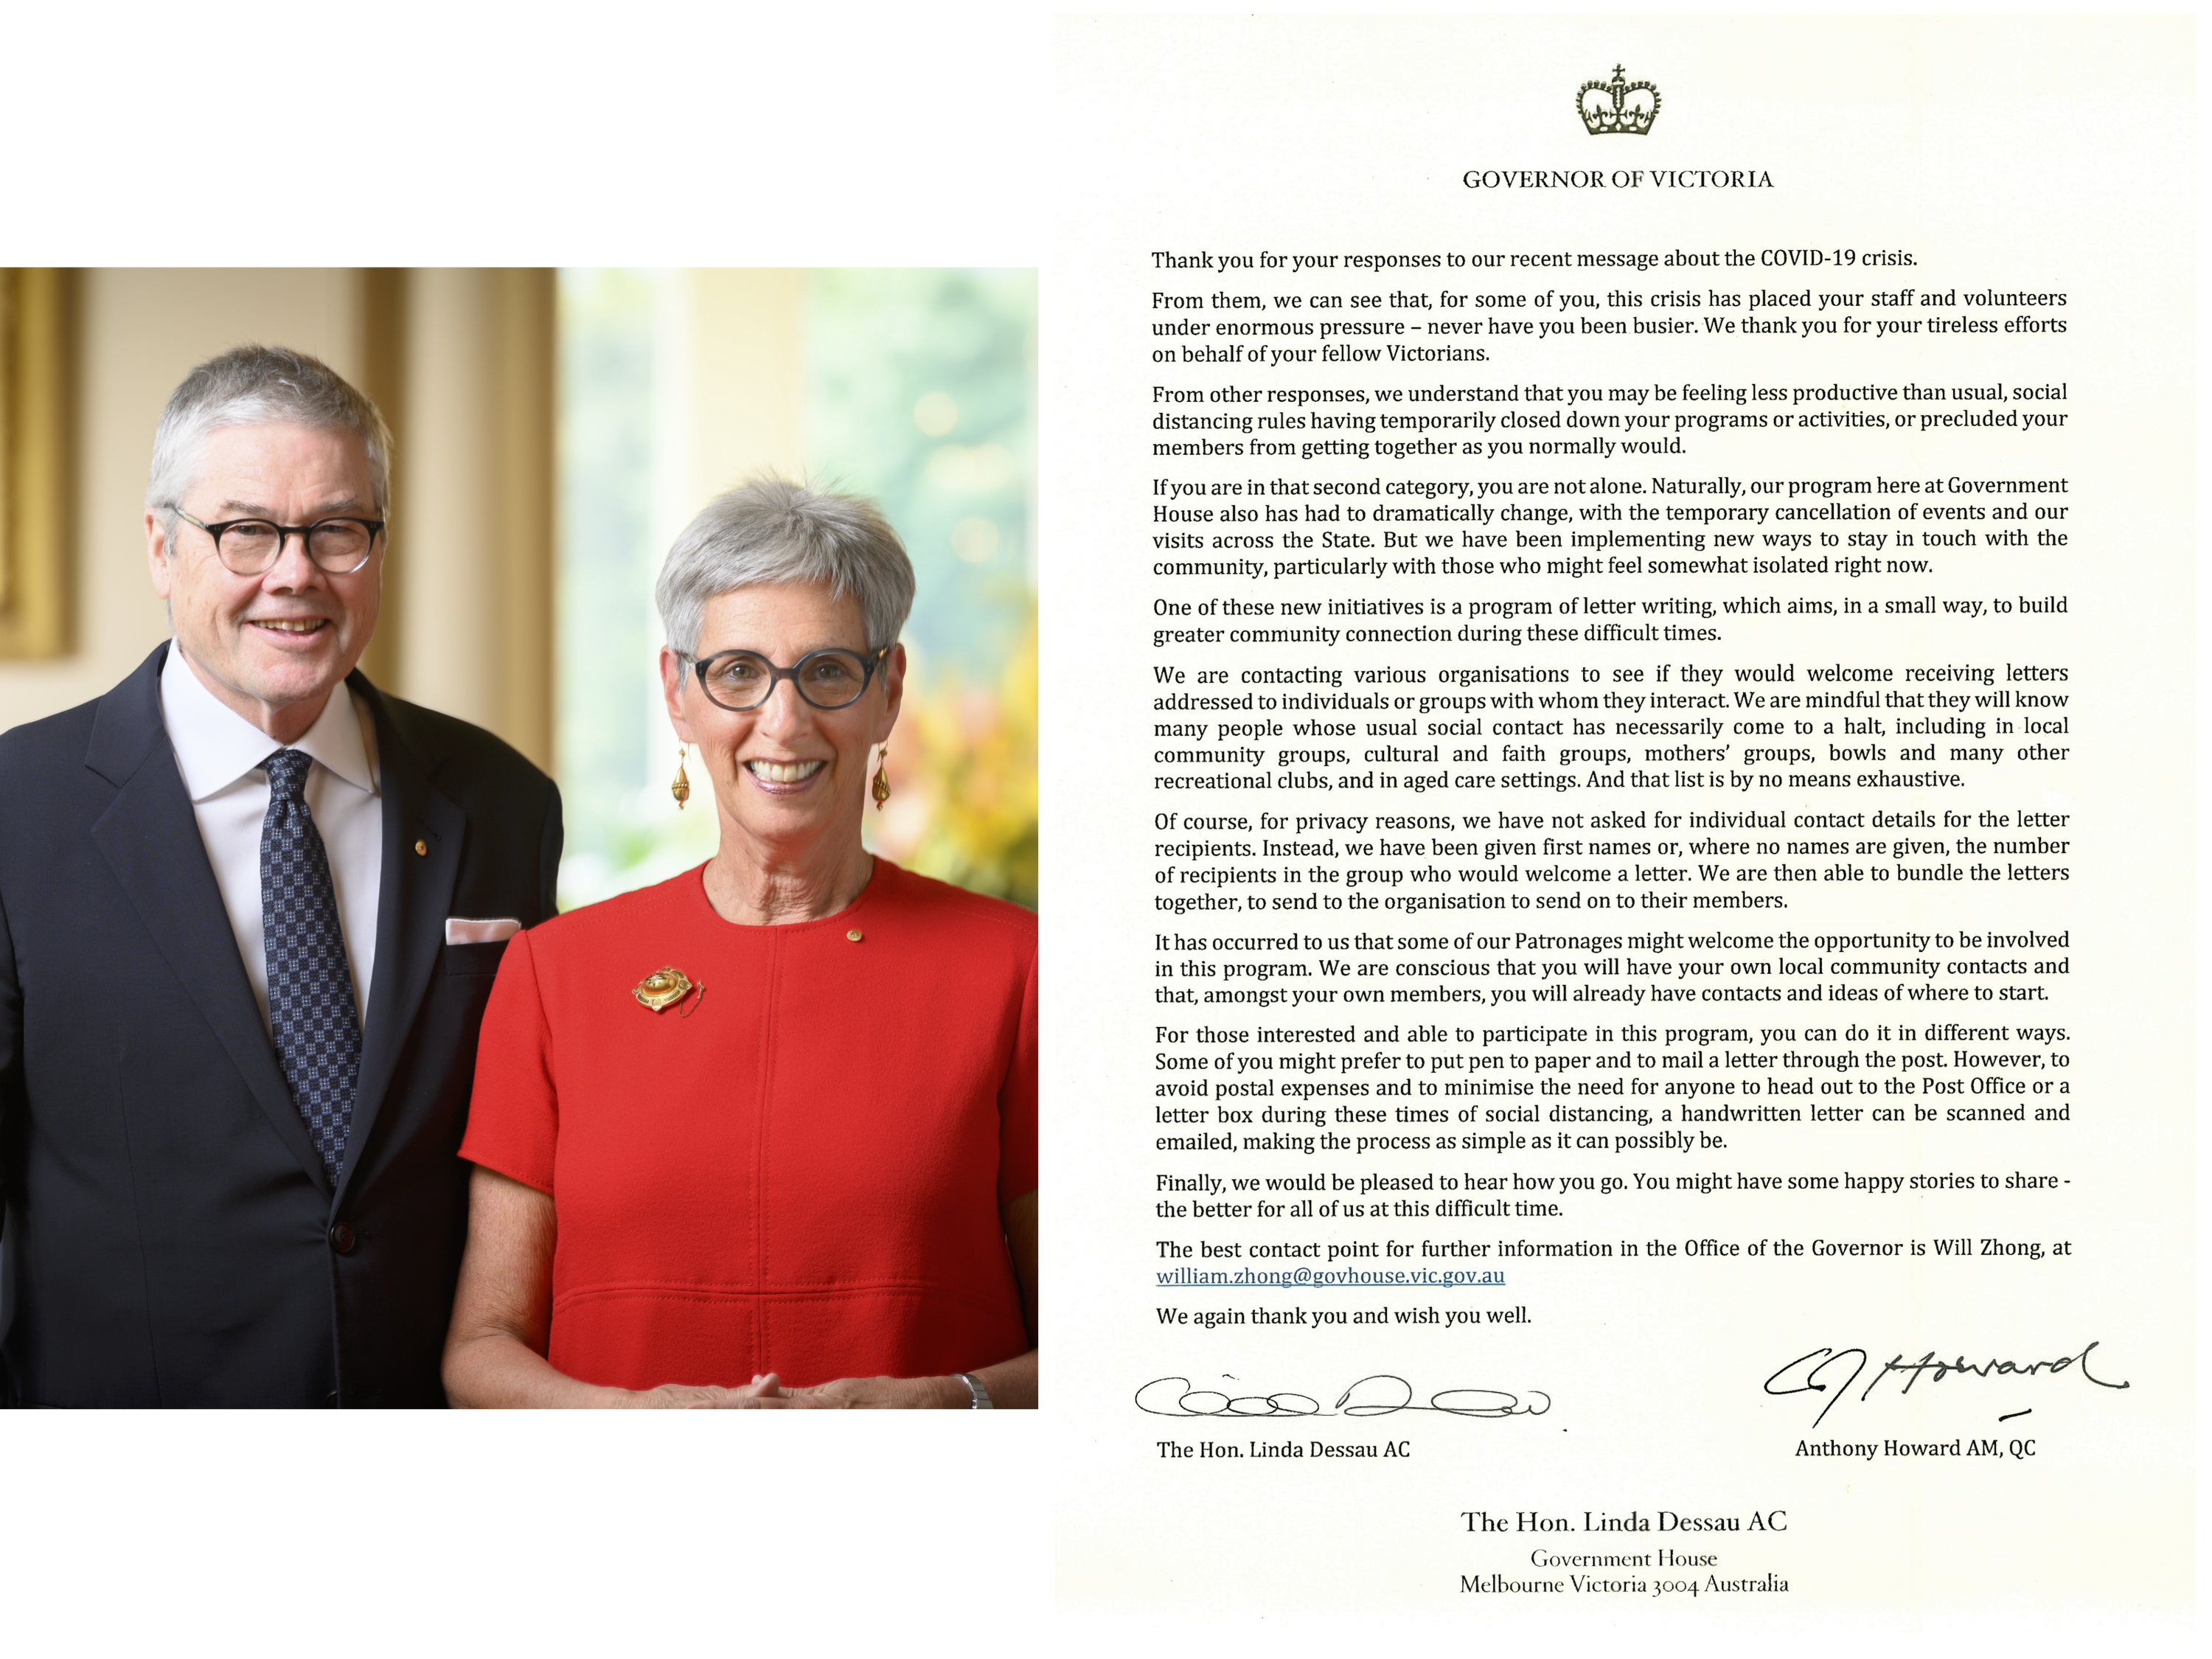 Message from our Patron, The Hon. Linda Dessau AC Governor of Victoria